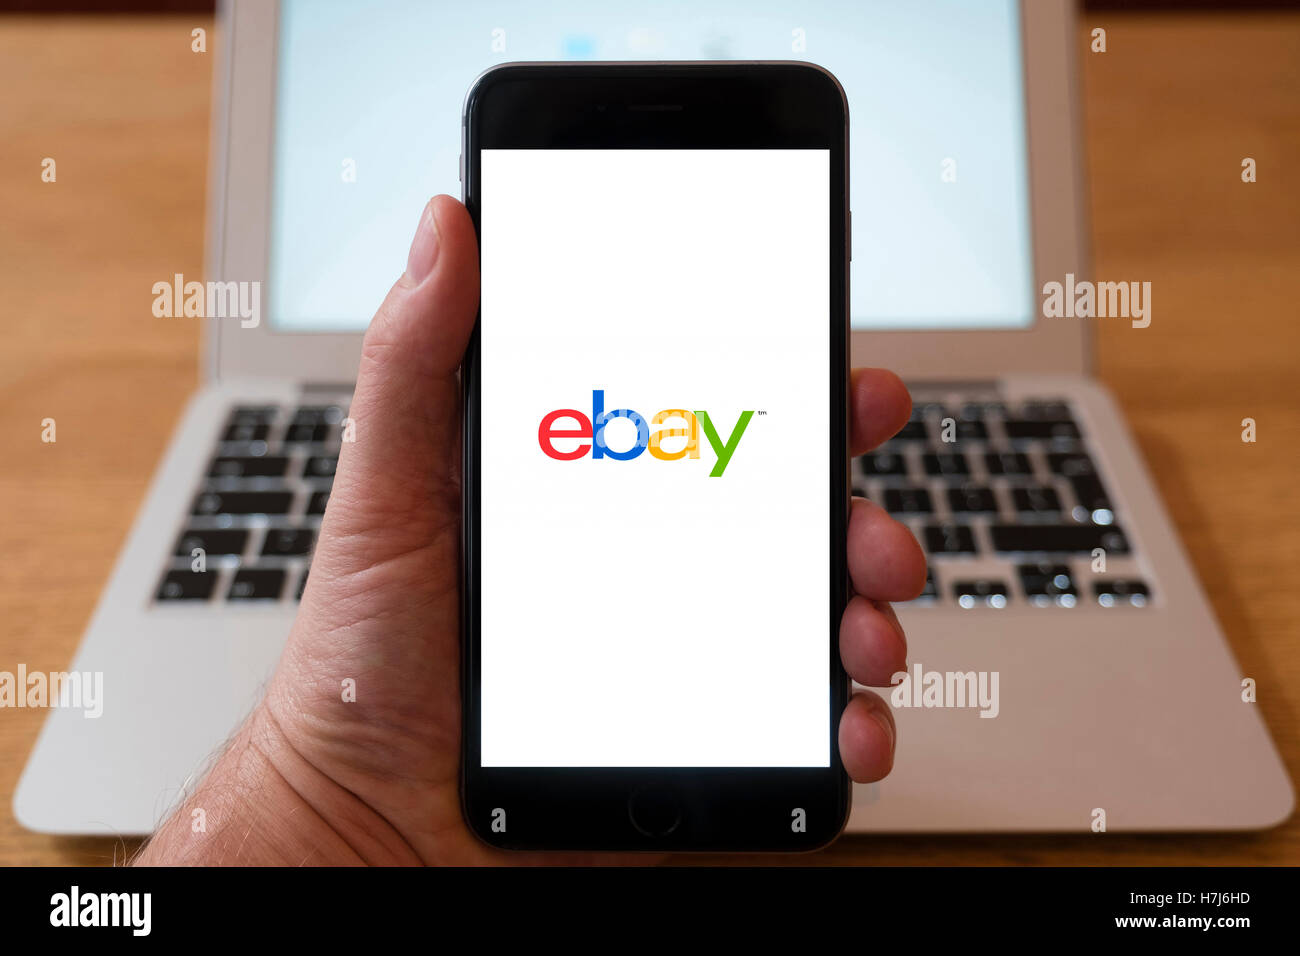 Using iPhone smart phone to display logo of eBay online auction website Stock Photo